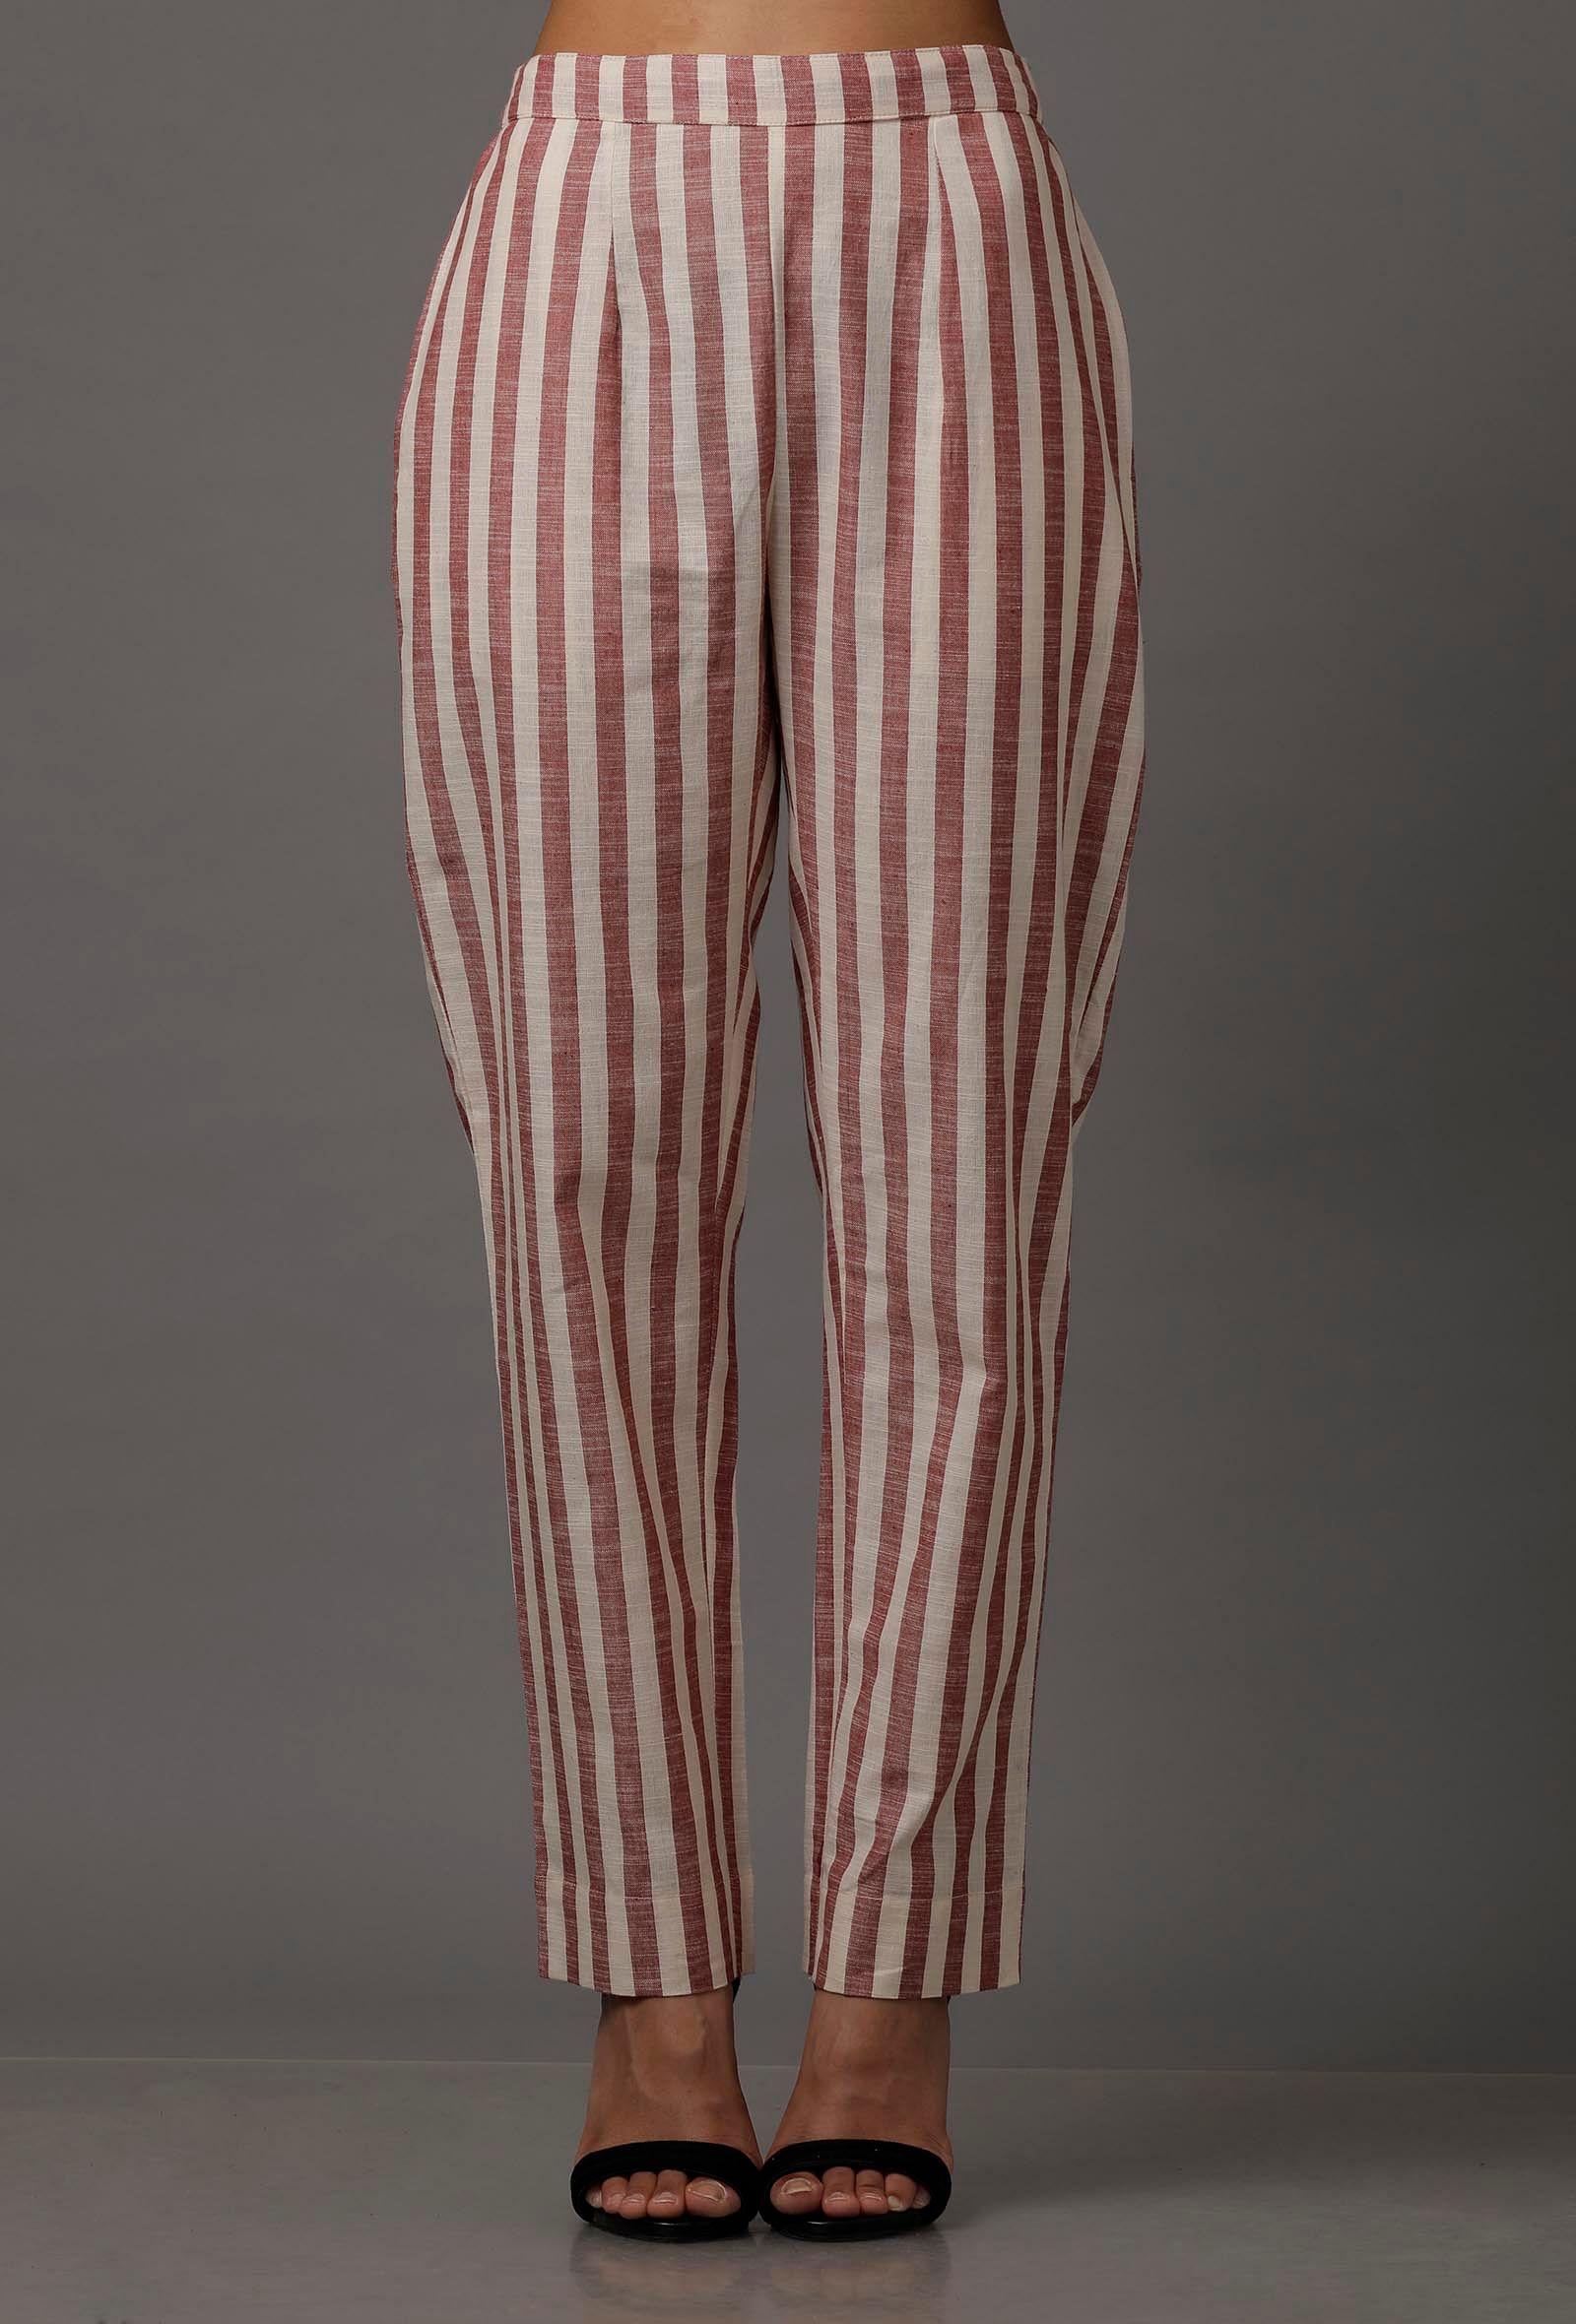 red-and-white-stripes-pure-woven-cotton-pants